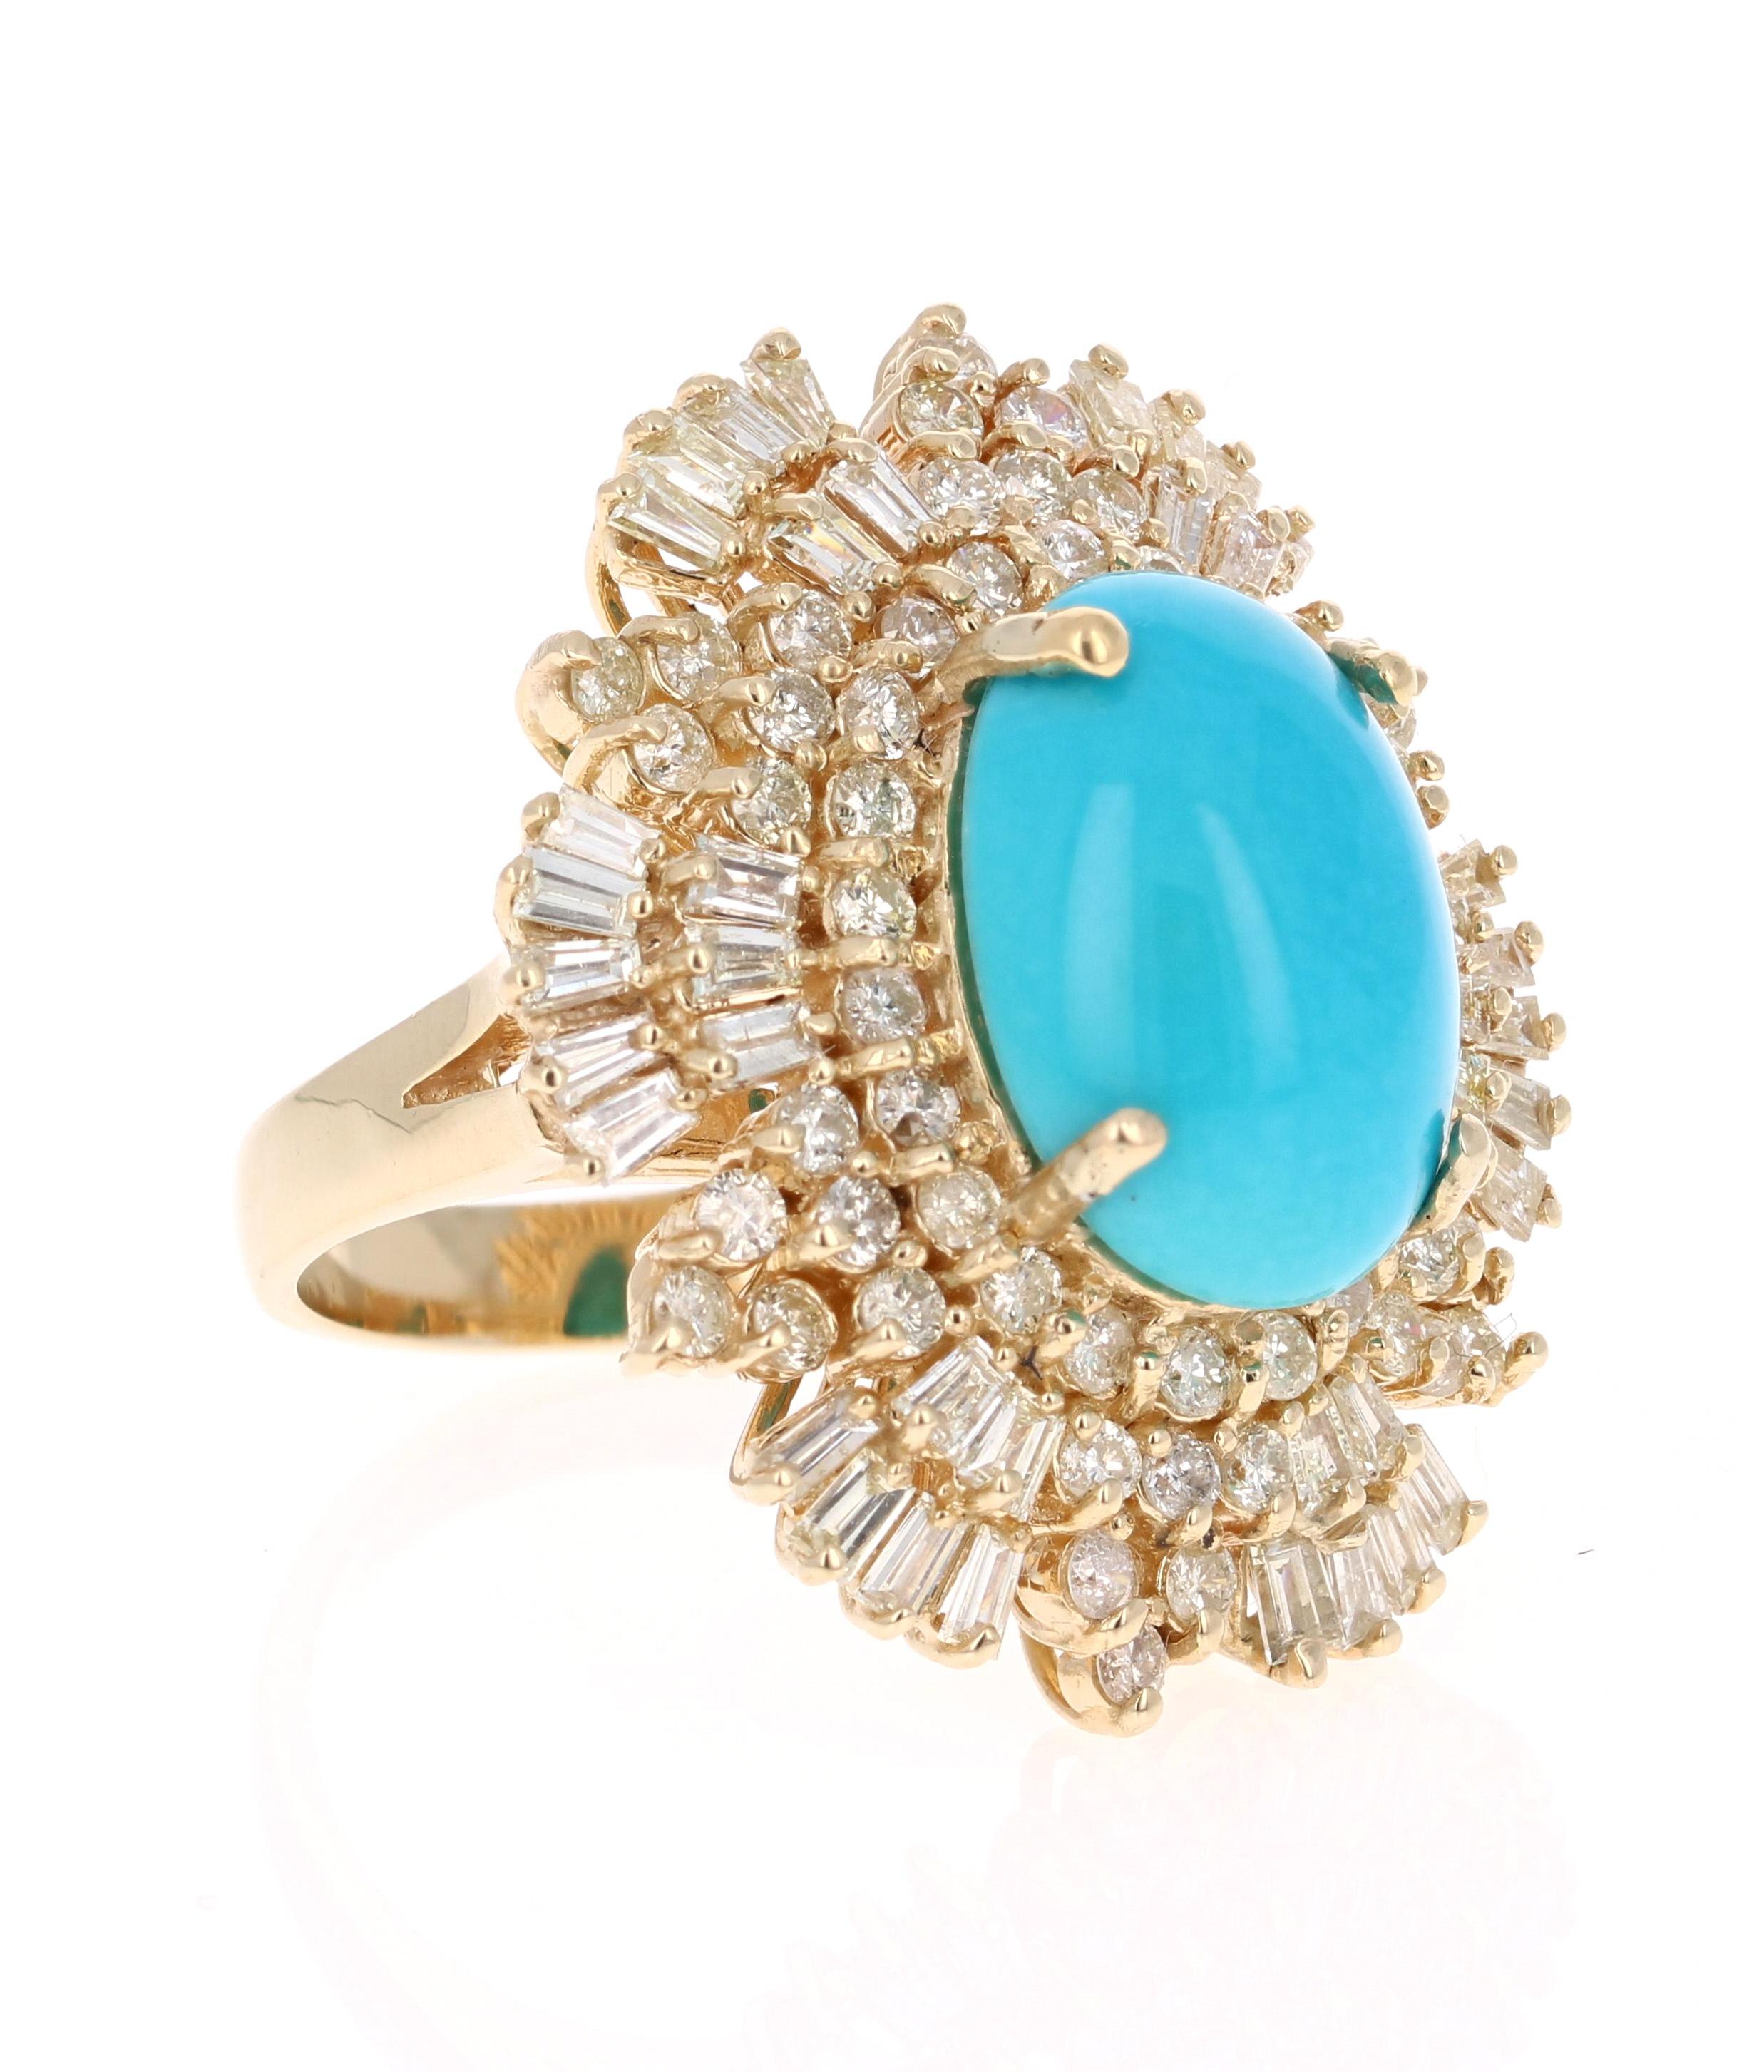 This is an exceptional and unique beauty! 

The Oval Cut Turquoise is 7.67 Carats and is surrounded by a cluster of beautifully set diamonds. There are 58 Round Cut Diamonds that weigh 1.52 Carats and 36 Baguette Cut Diamonds that weigh 1.30 Carats.